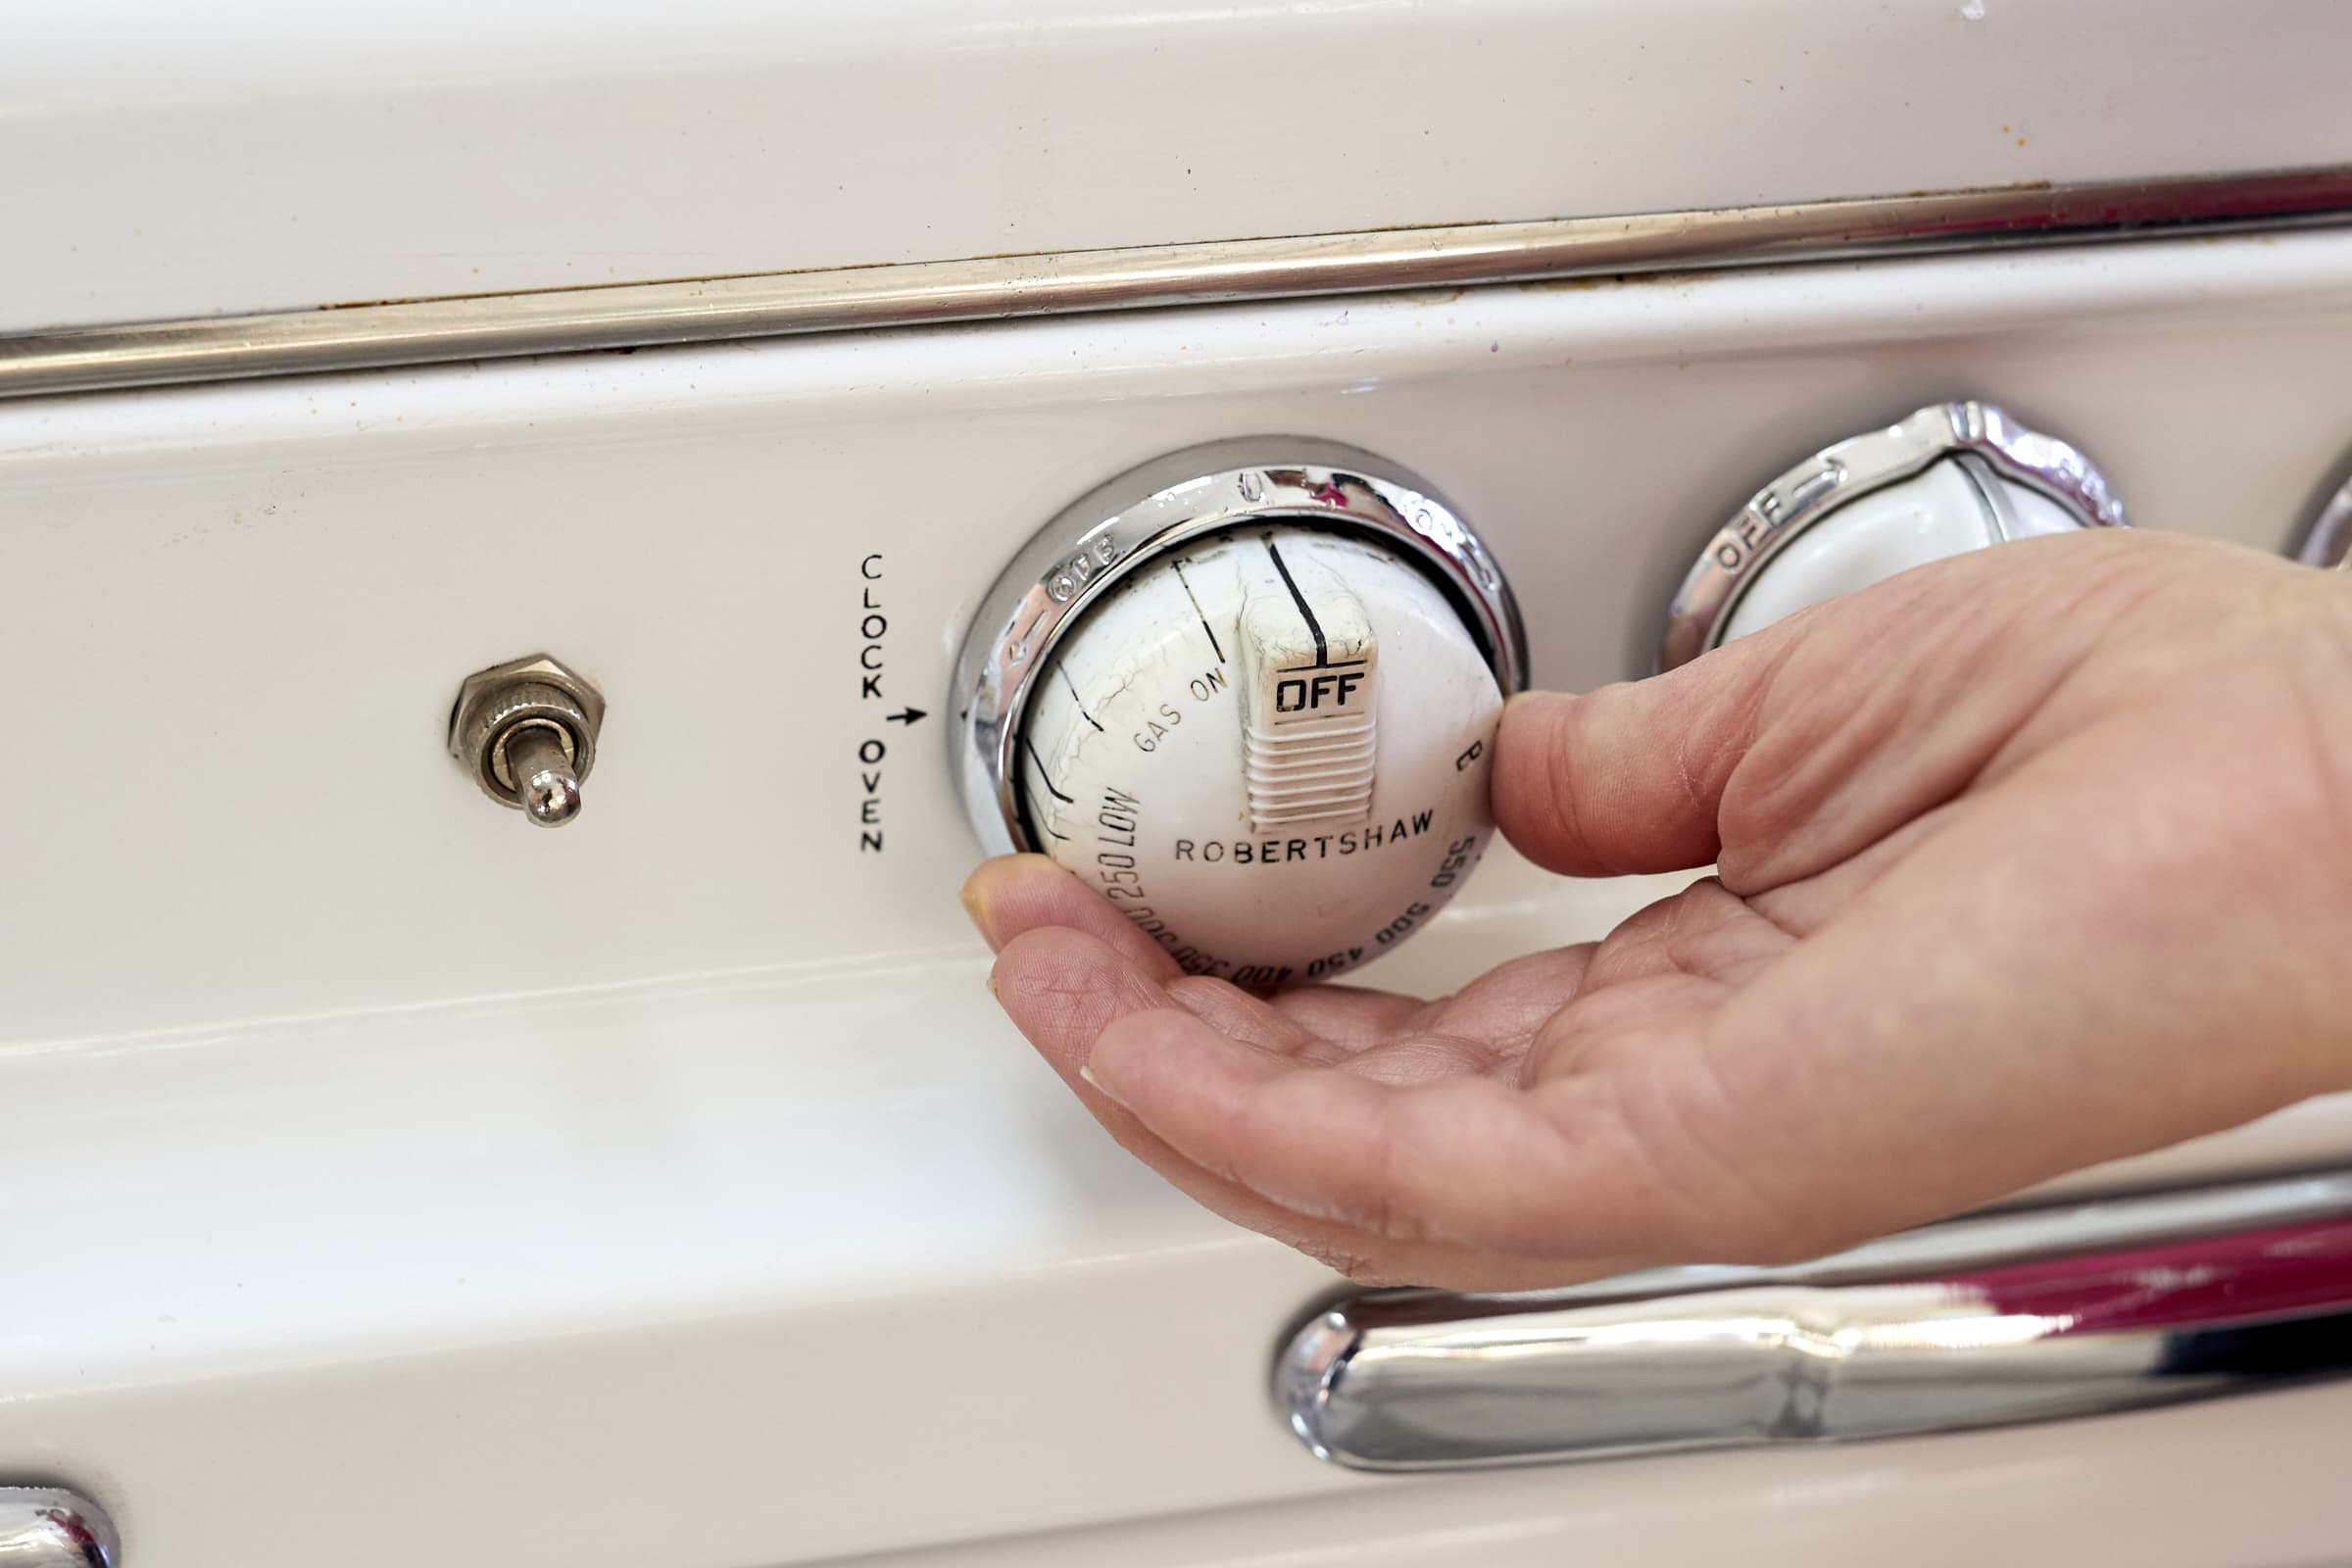 How to Turn On the Gas Oven